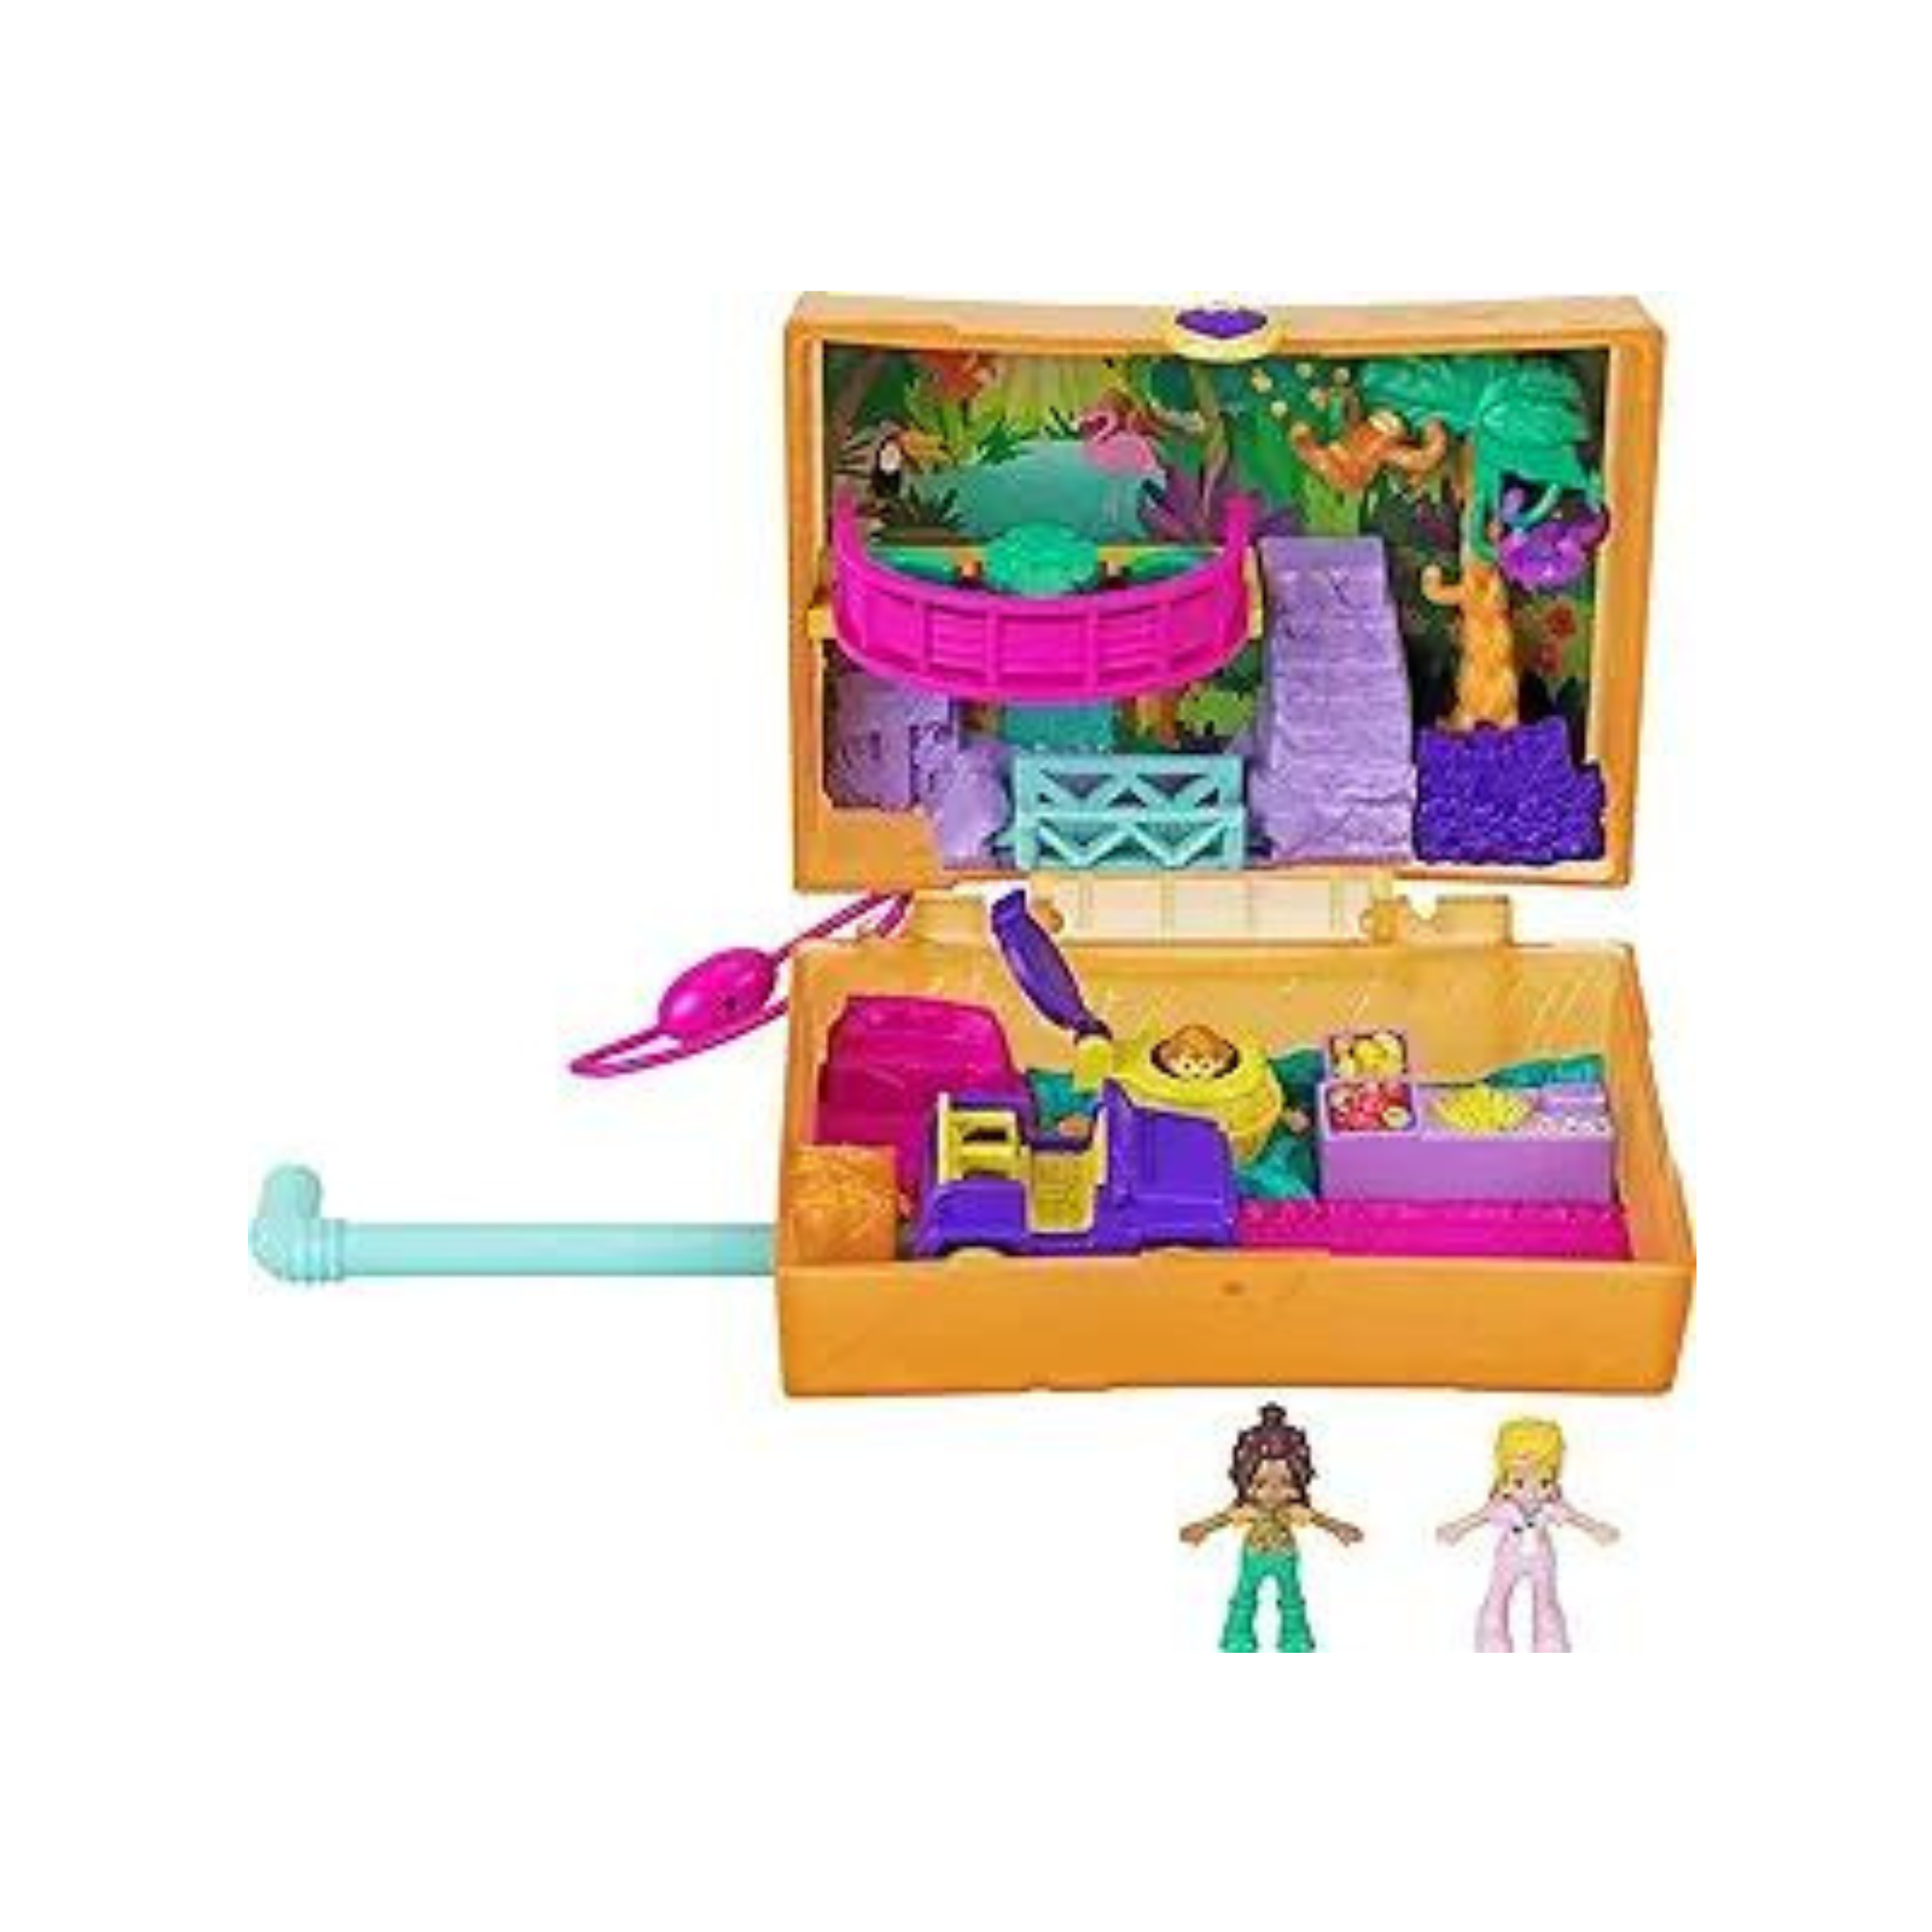 Polly Pocket Playset, Travel Toy with 2 Micro Dolls, Jungle Safari Compact